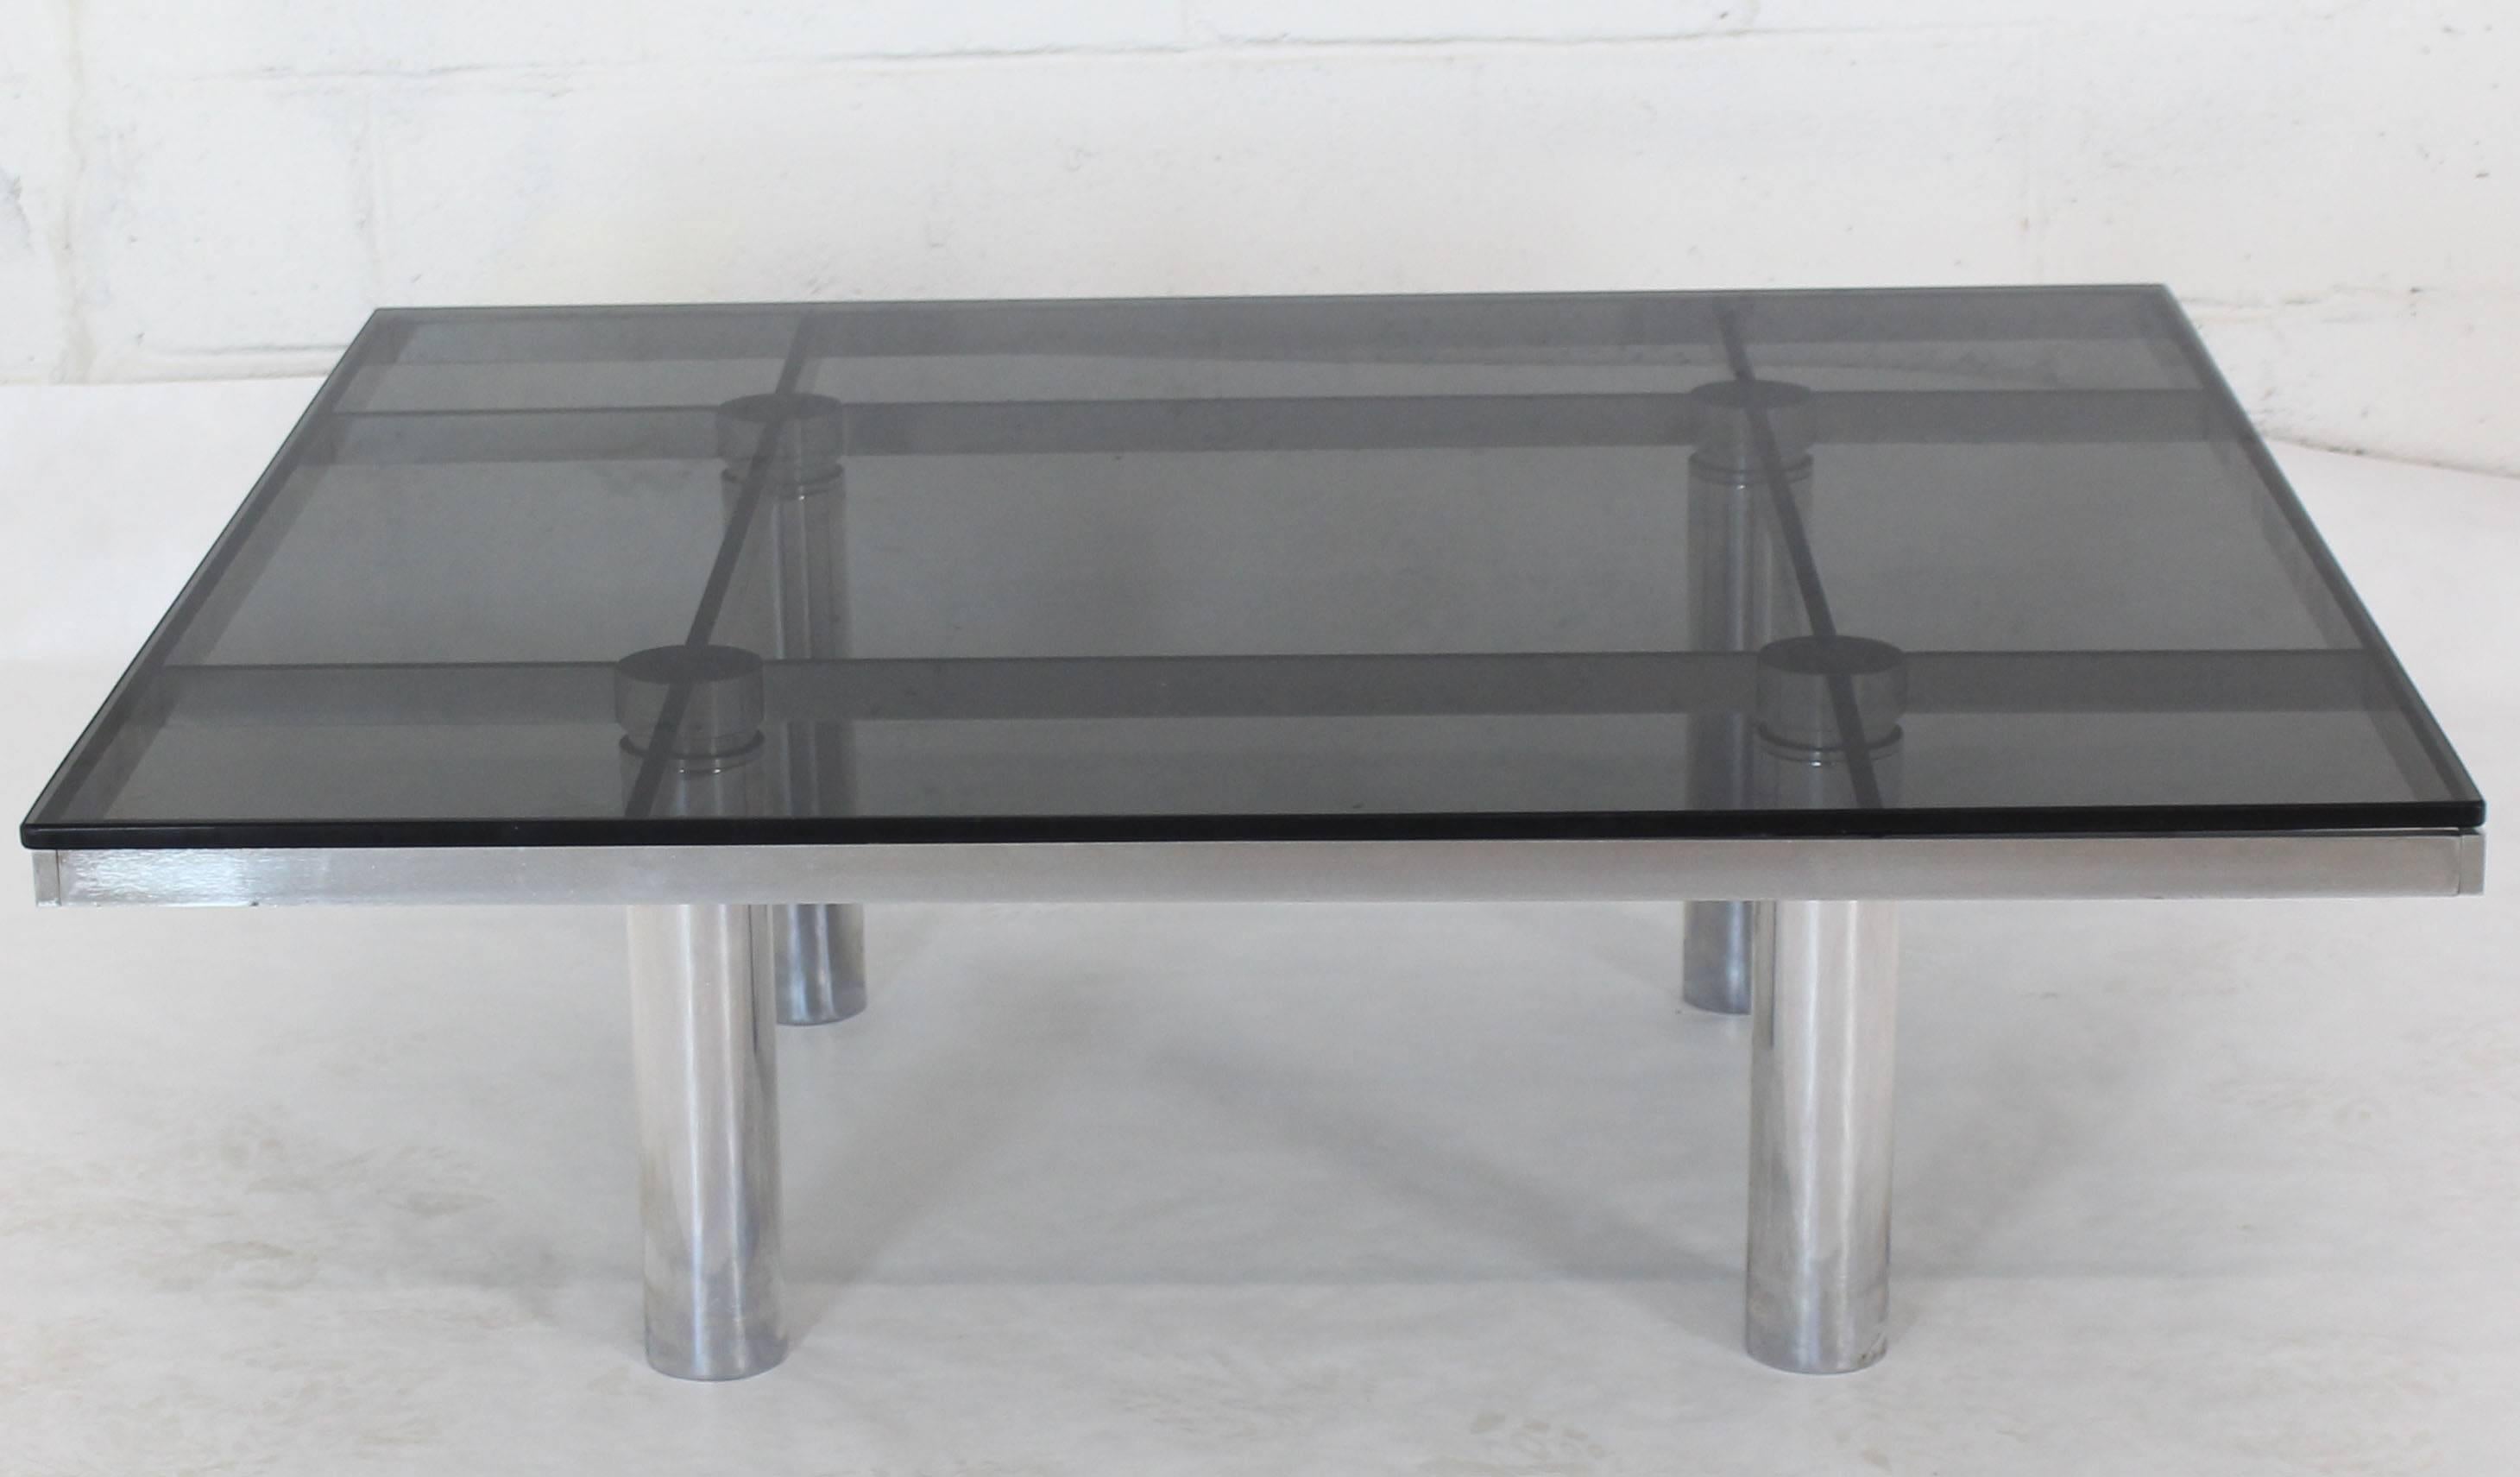 Mid-Century Modern Square Chrome Smoke Glass Coffee Table by Tobia Scarpa for Knoll